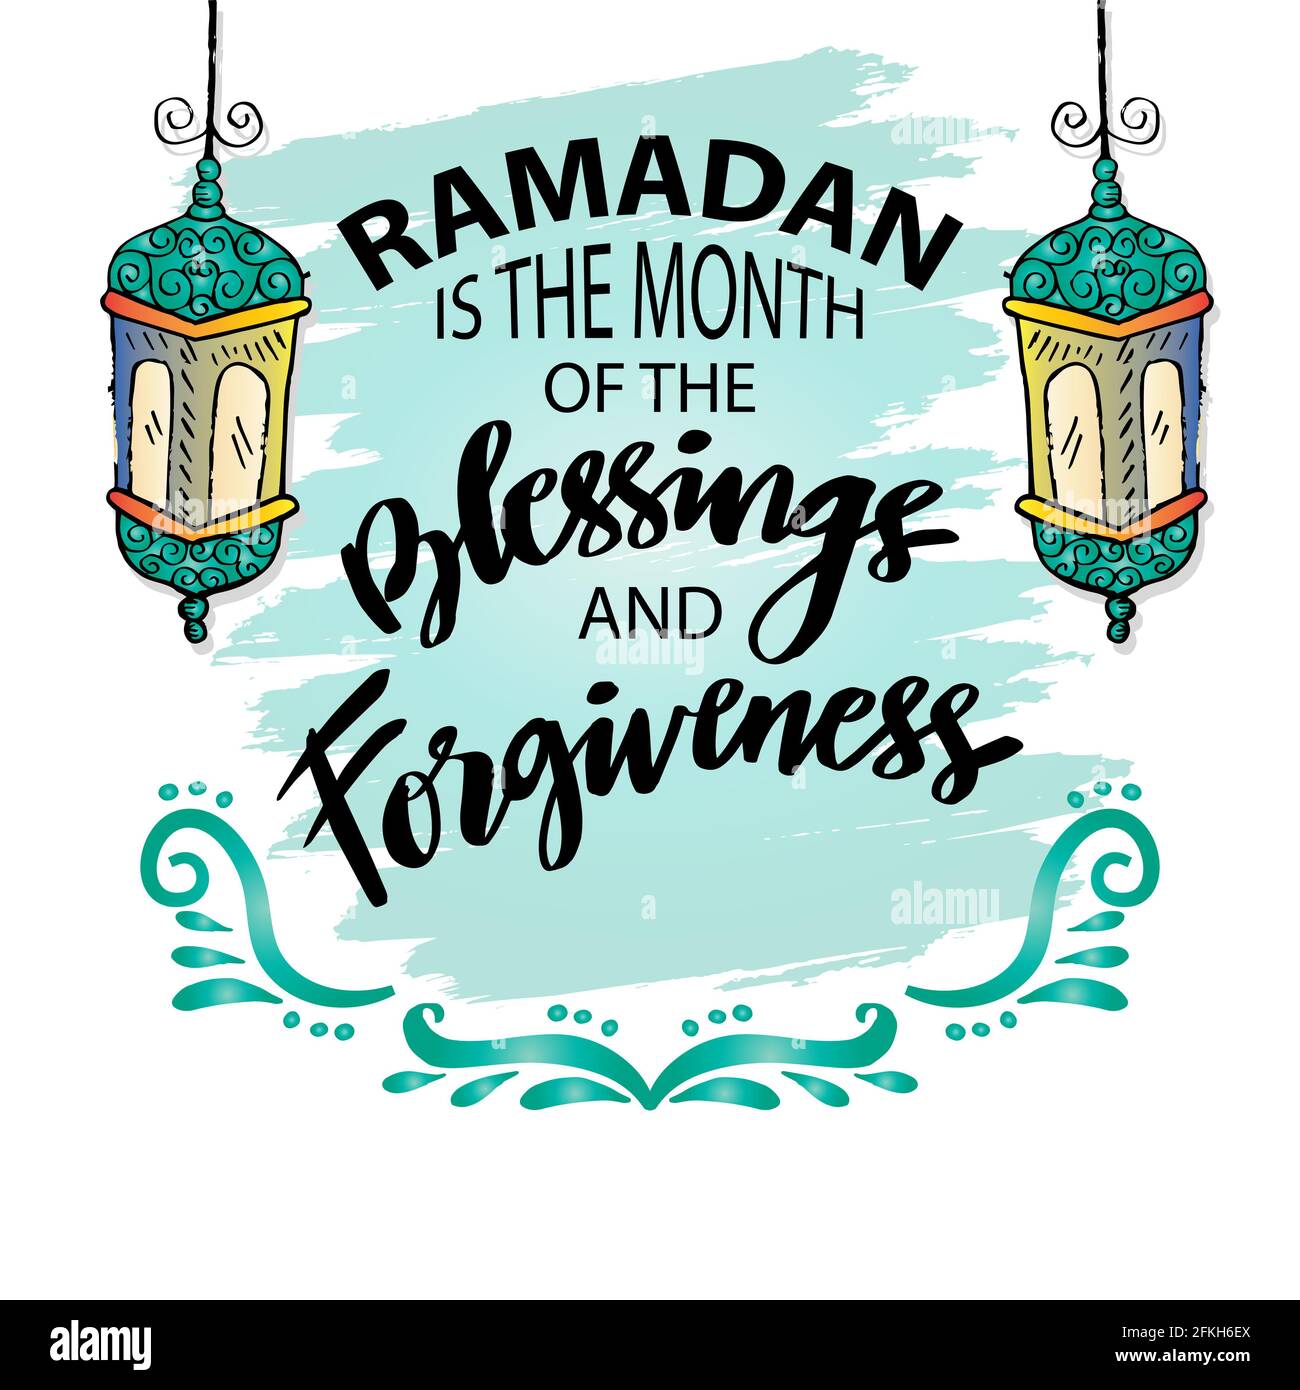 Ramadan is the month of the blessing and forgiveness. Ramadan ...